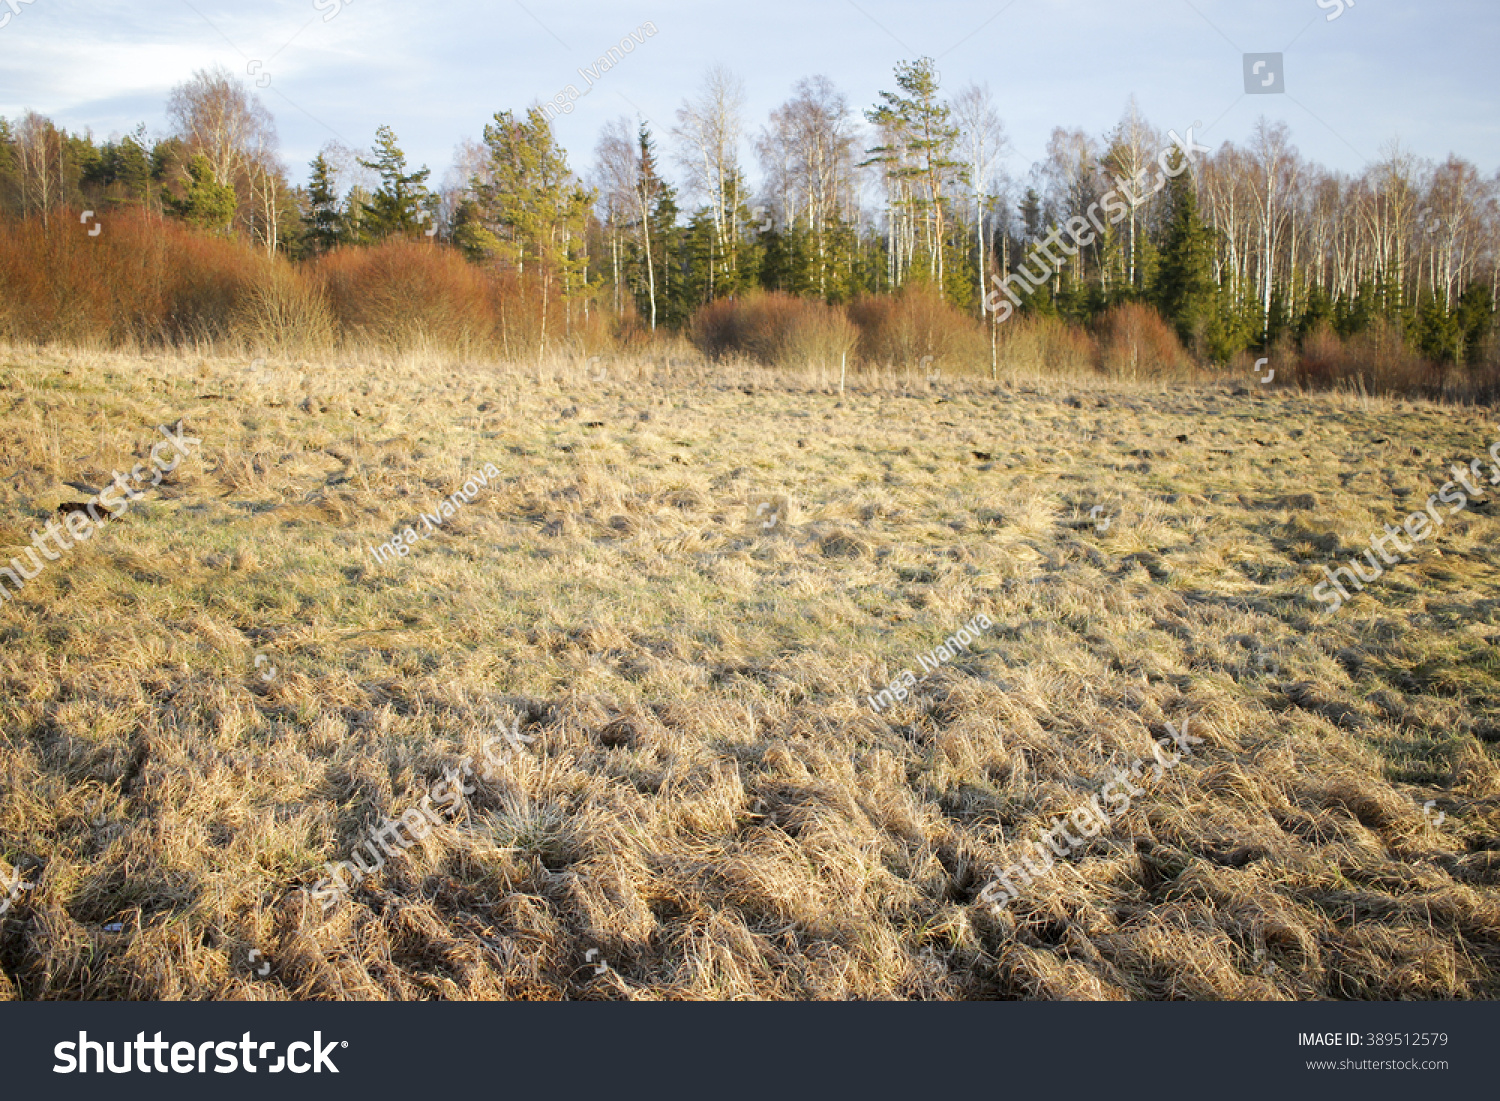 spring, brown grass, melted snow on a sunny day #389512579